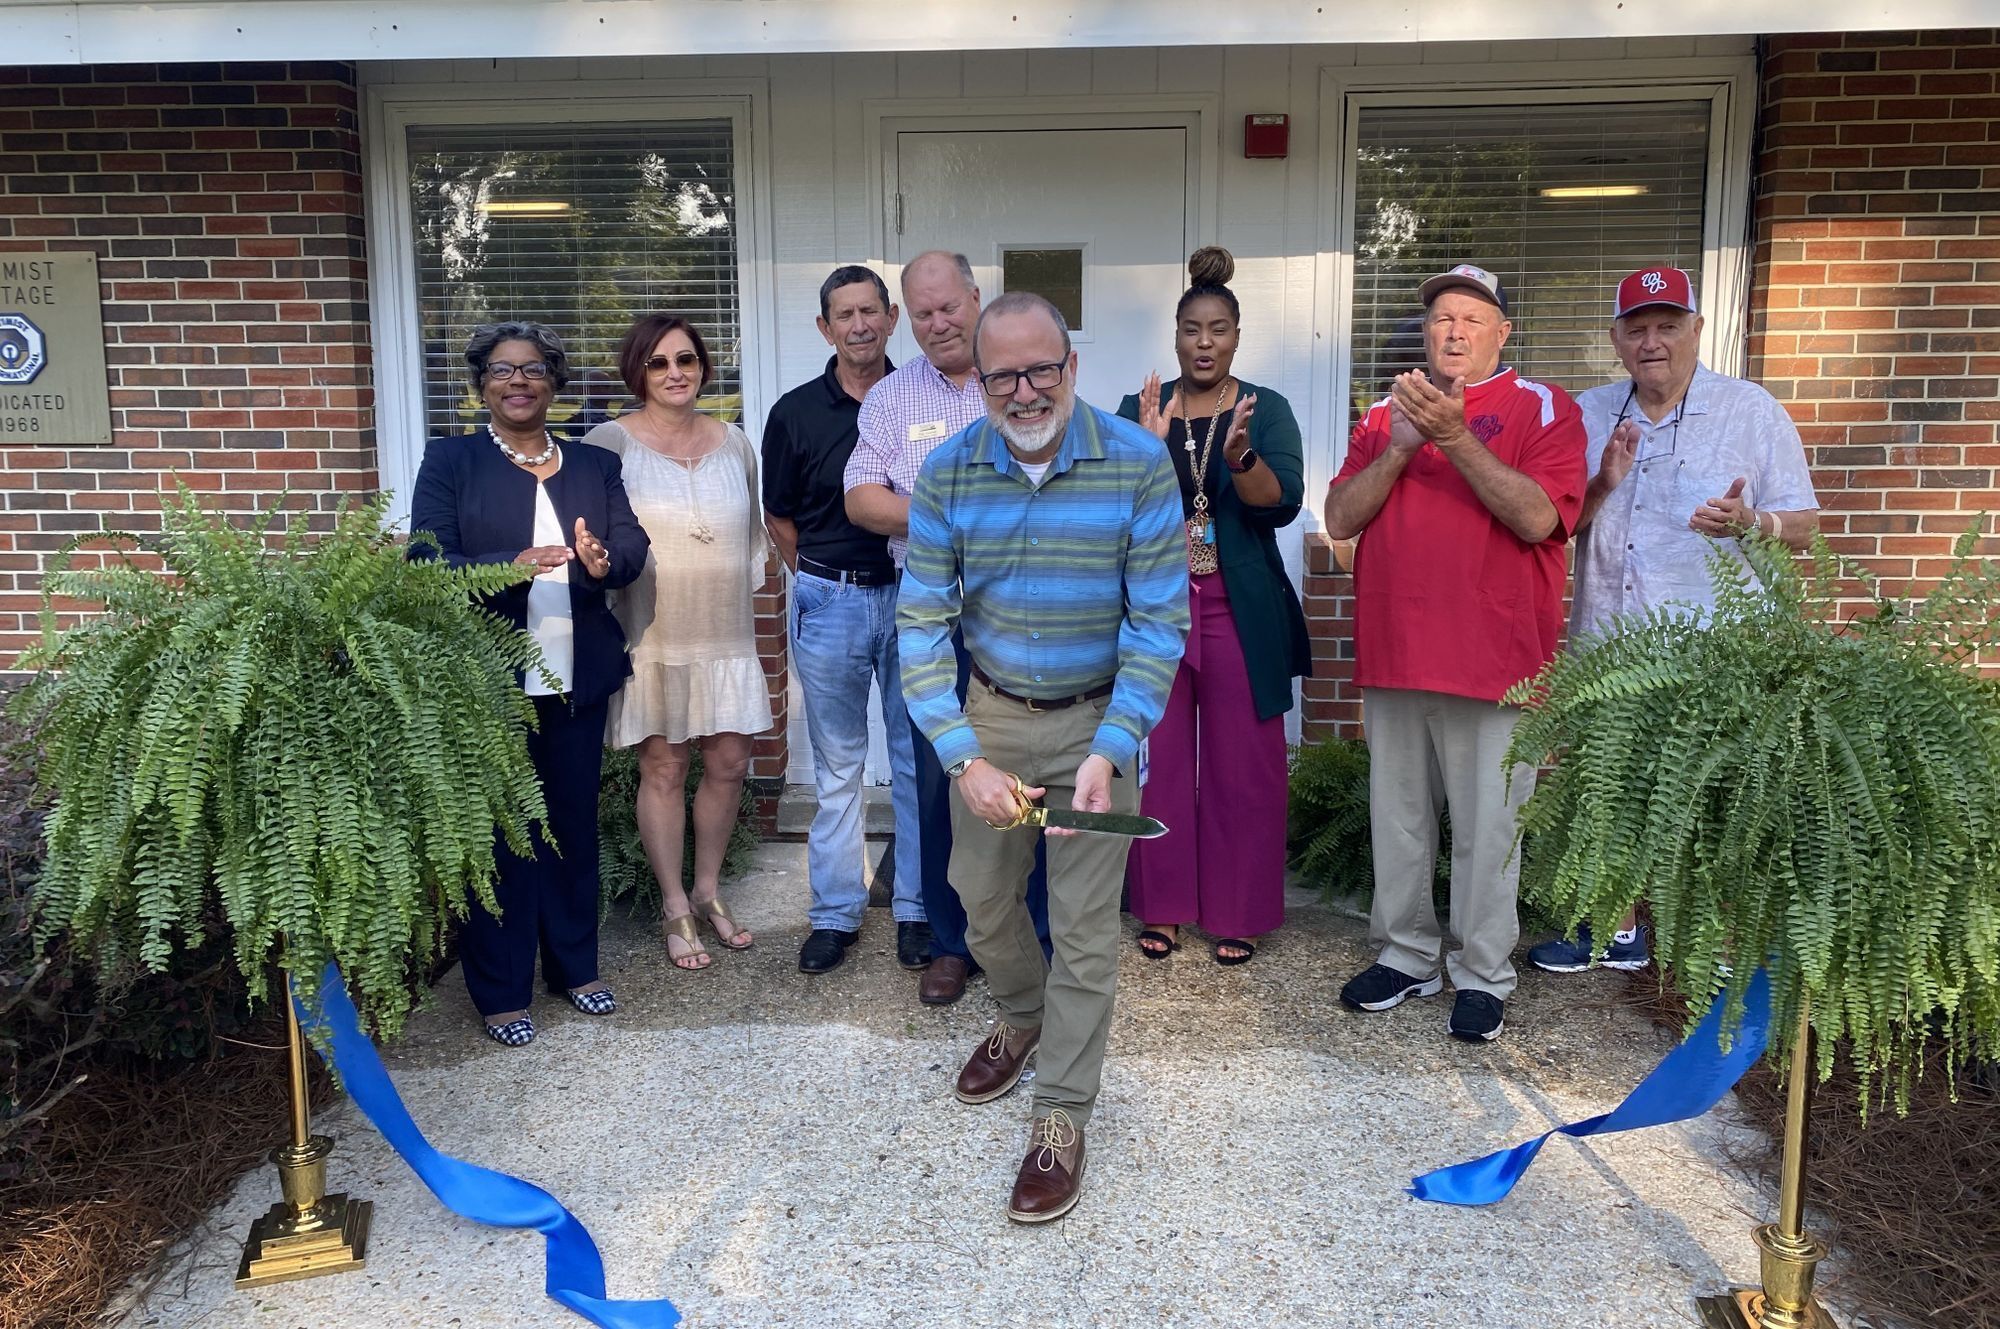 Optimist Cottage reopened after three-month in-kind renovation from  Winter Park Optimist Club and dozens of regional businesses